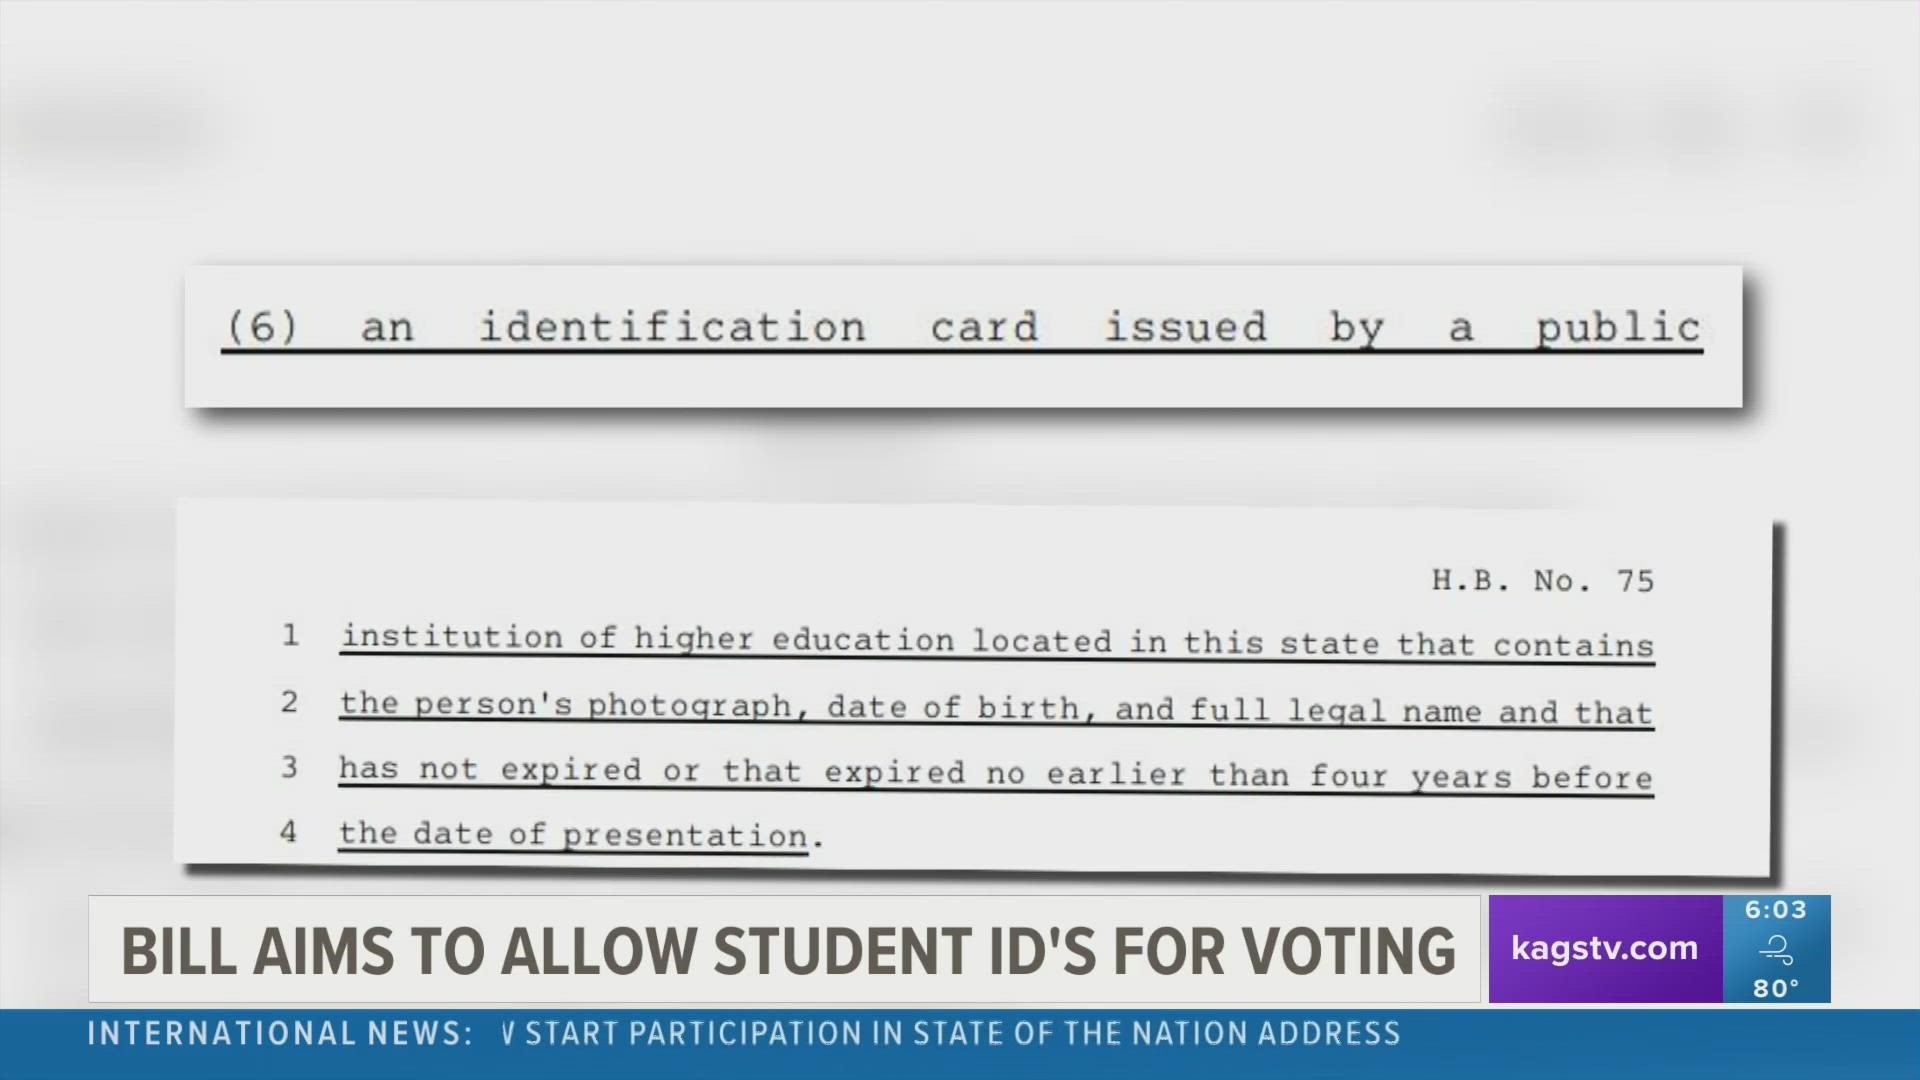 If passed, House Bill 75 would add student ID's to the already existing forms of ID allowed by the State of Texas for voter registration.